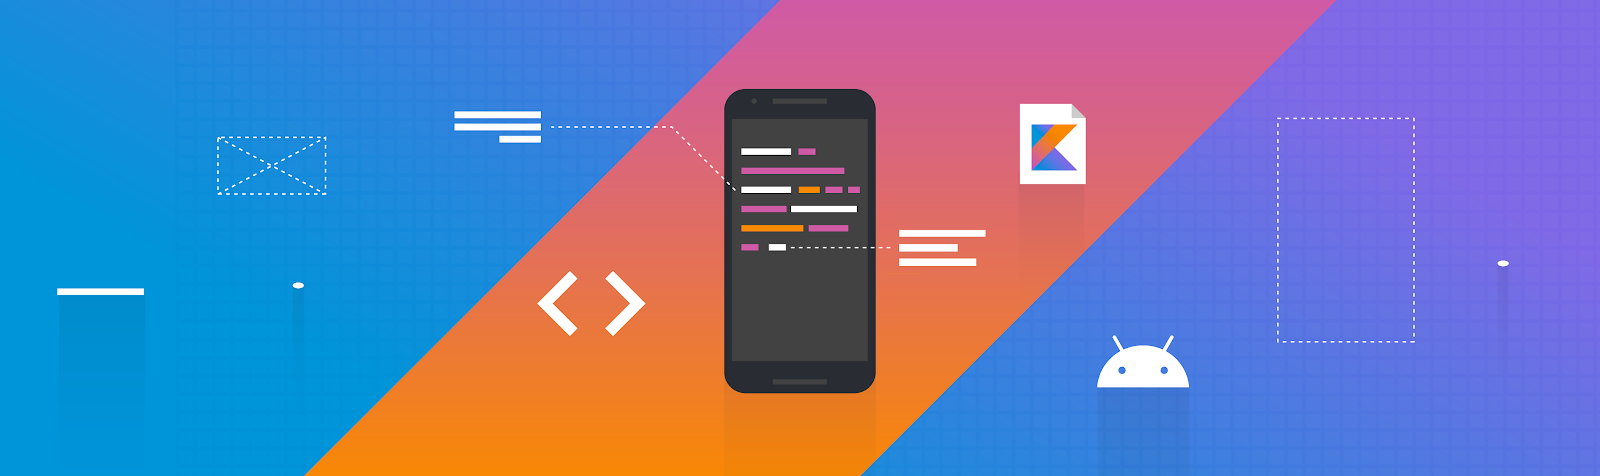 Android Developers Blog: New language features and more in Kotlin 1.4